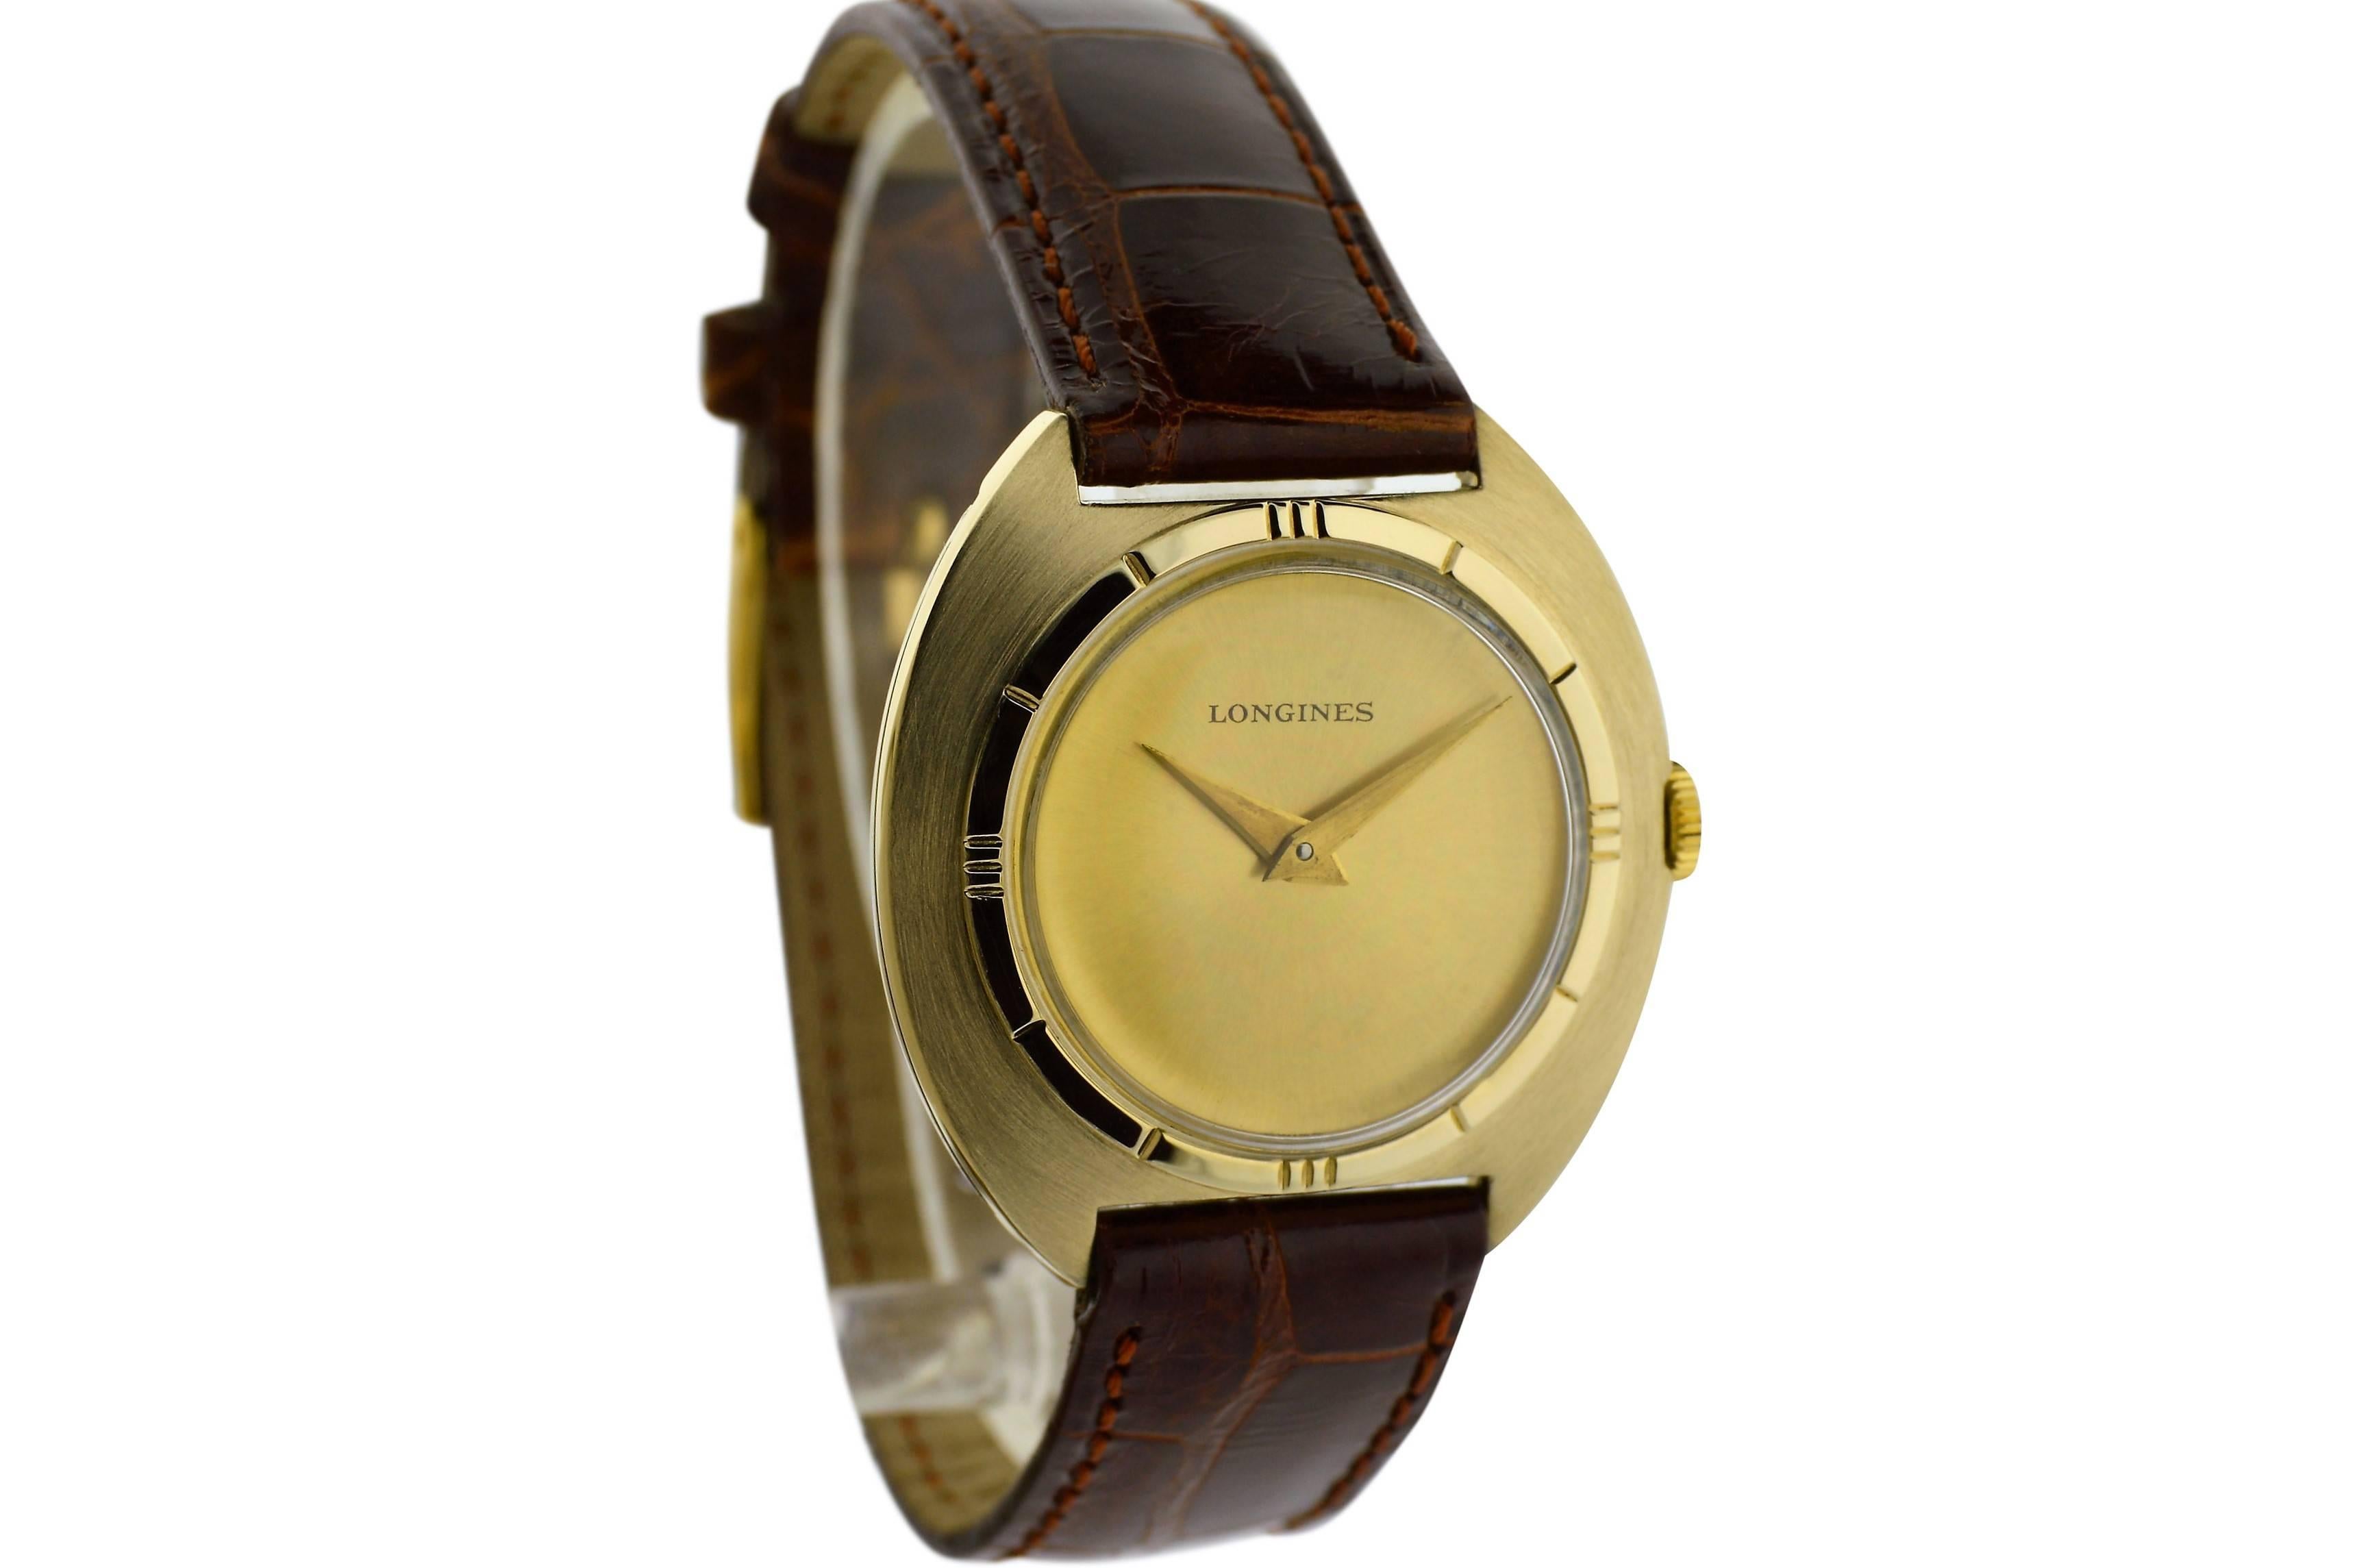 FACTORY / HOUSE: Longines Watch Company
STYLE / REFERENCE: Tonneau Shape
METAL / MATERIAL: Yellow Gold Filled
DIMENSIONS:  34mm  X  33mm
CIRCA: 1960's
MOVEMENT / CALIBER: Winding / Jewels / 370 Cal. 
DIAL / HANDS: Original Brushed Gold / Dauphine